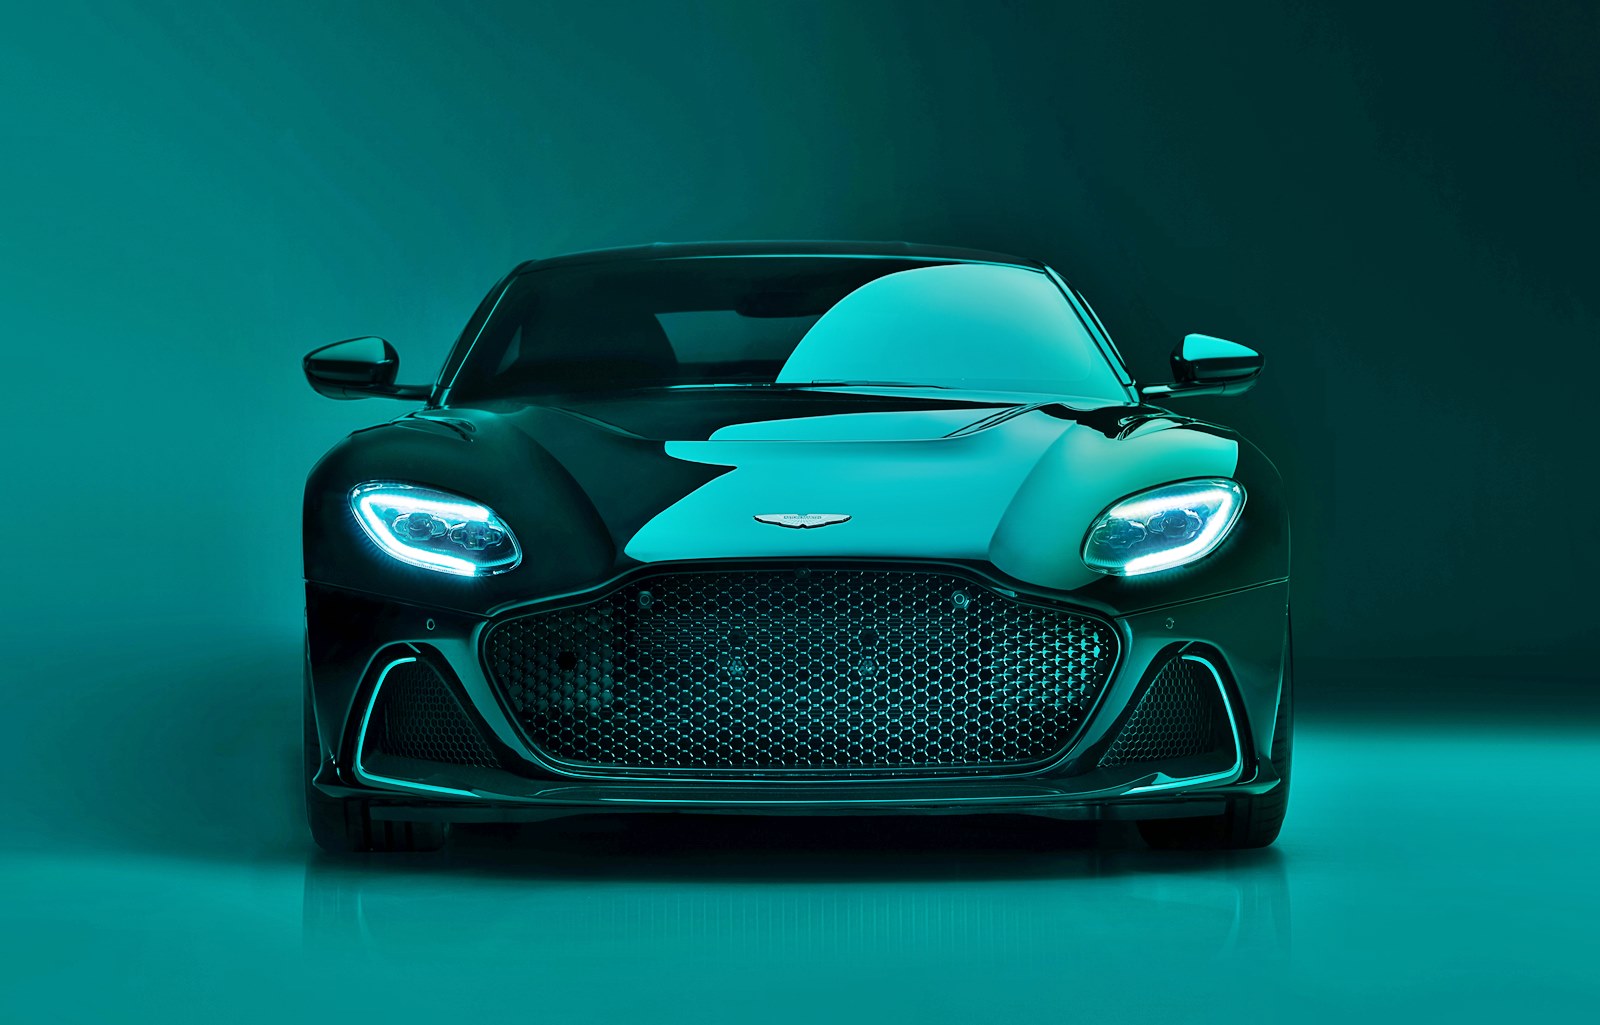 Front view of the Aston Martin DBS 770 Ultimate